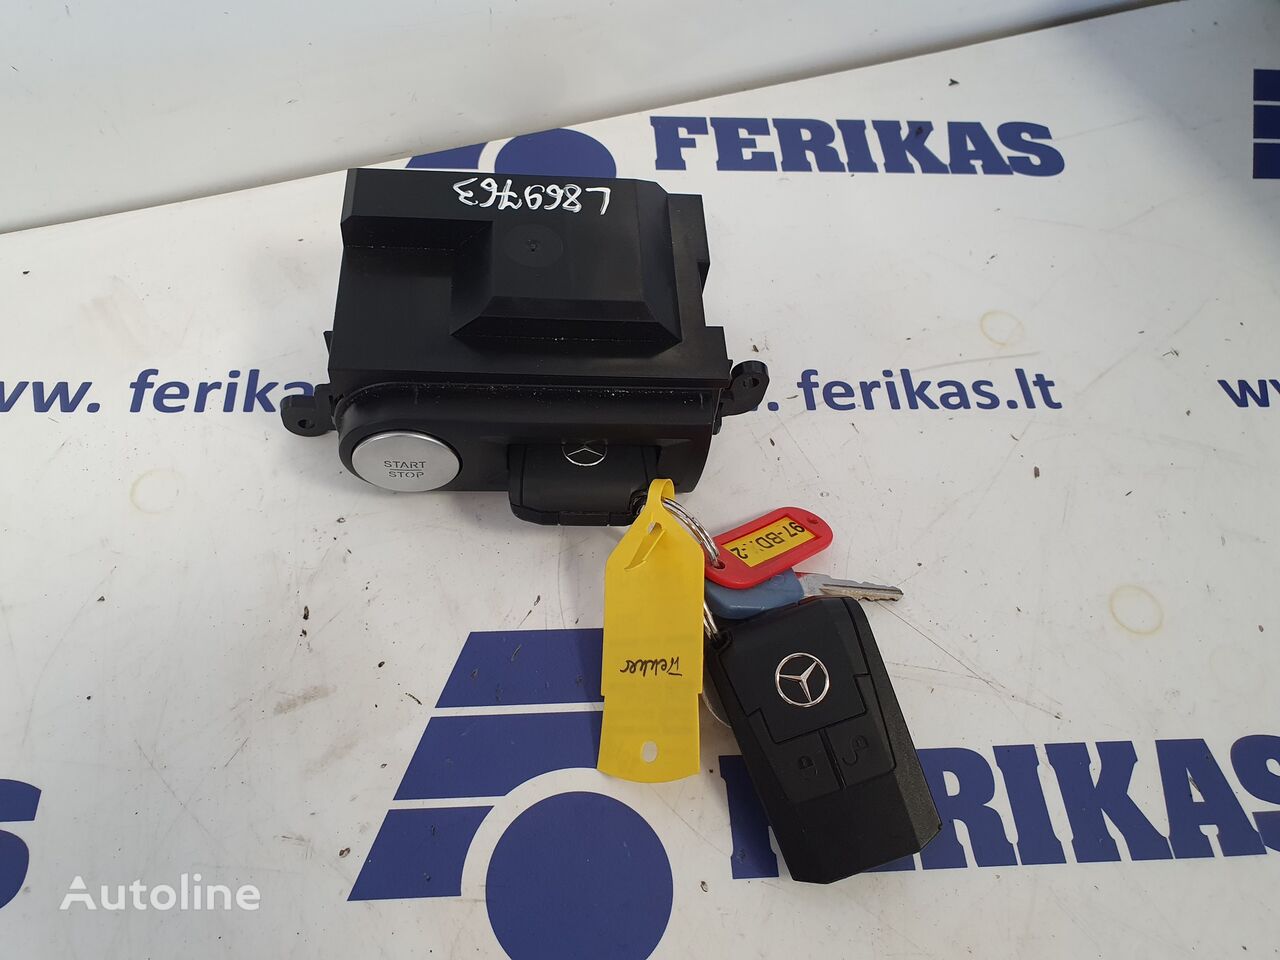 Mercedes-Benz Actros MP4 ignition lock A0004468608 cerradura de encendido para Mercedes-Benz Actros tractora